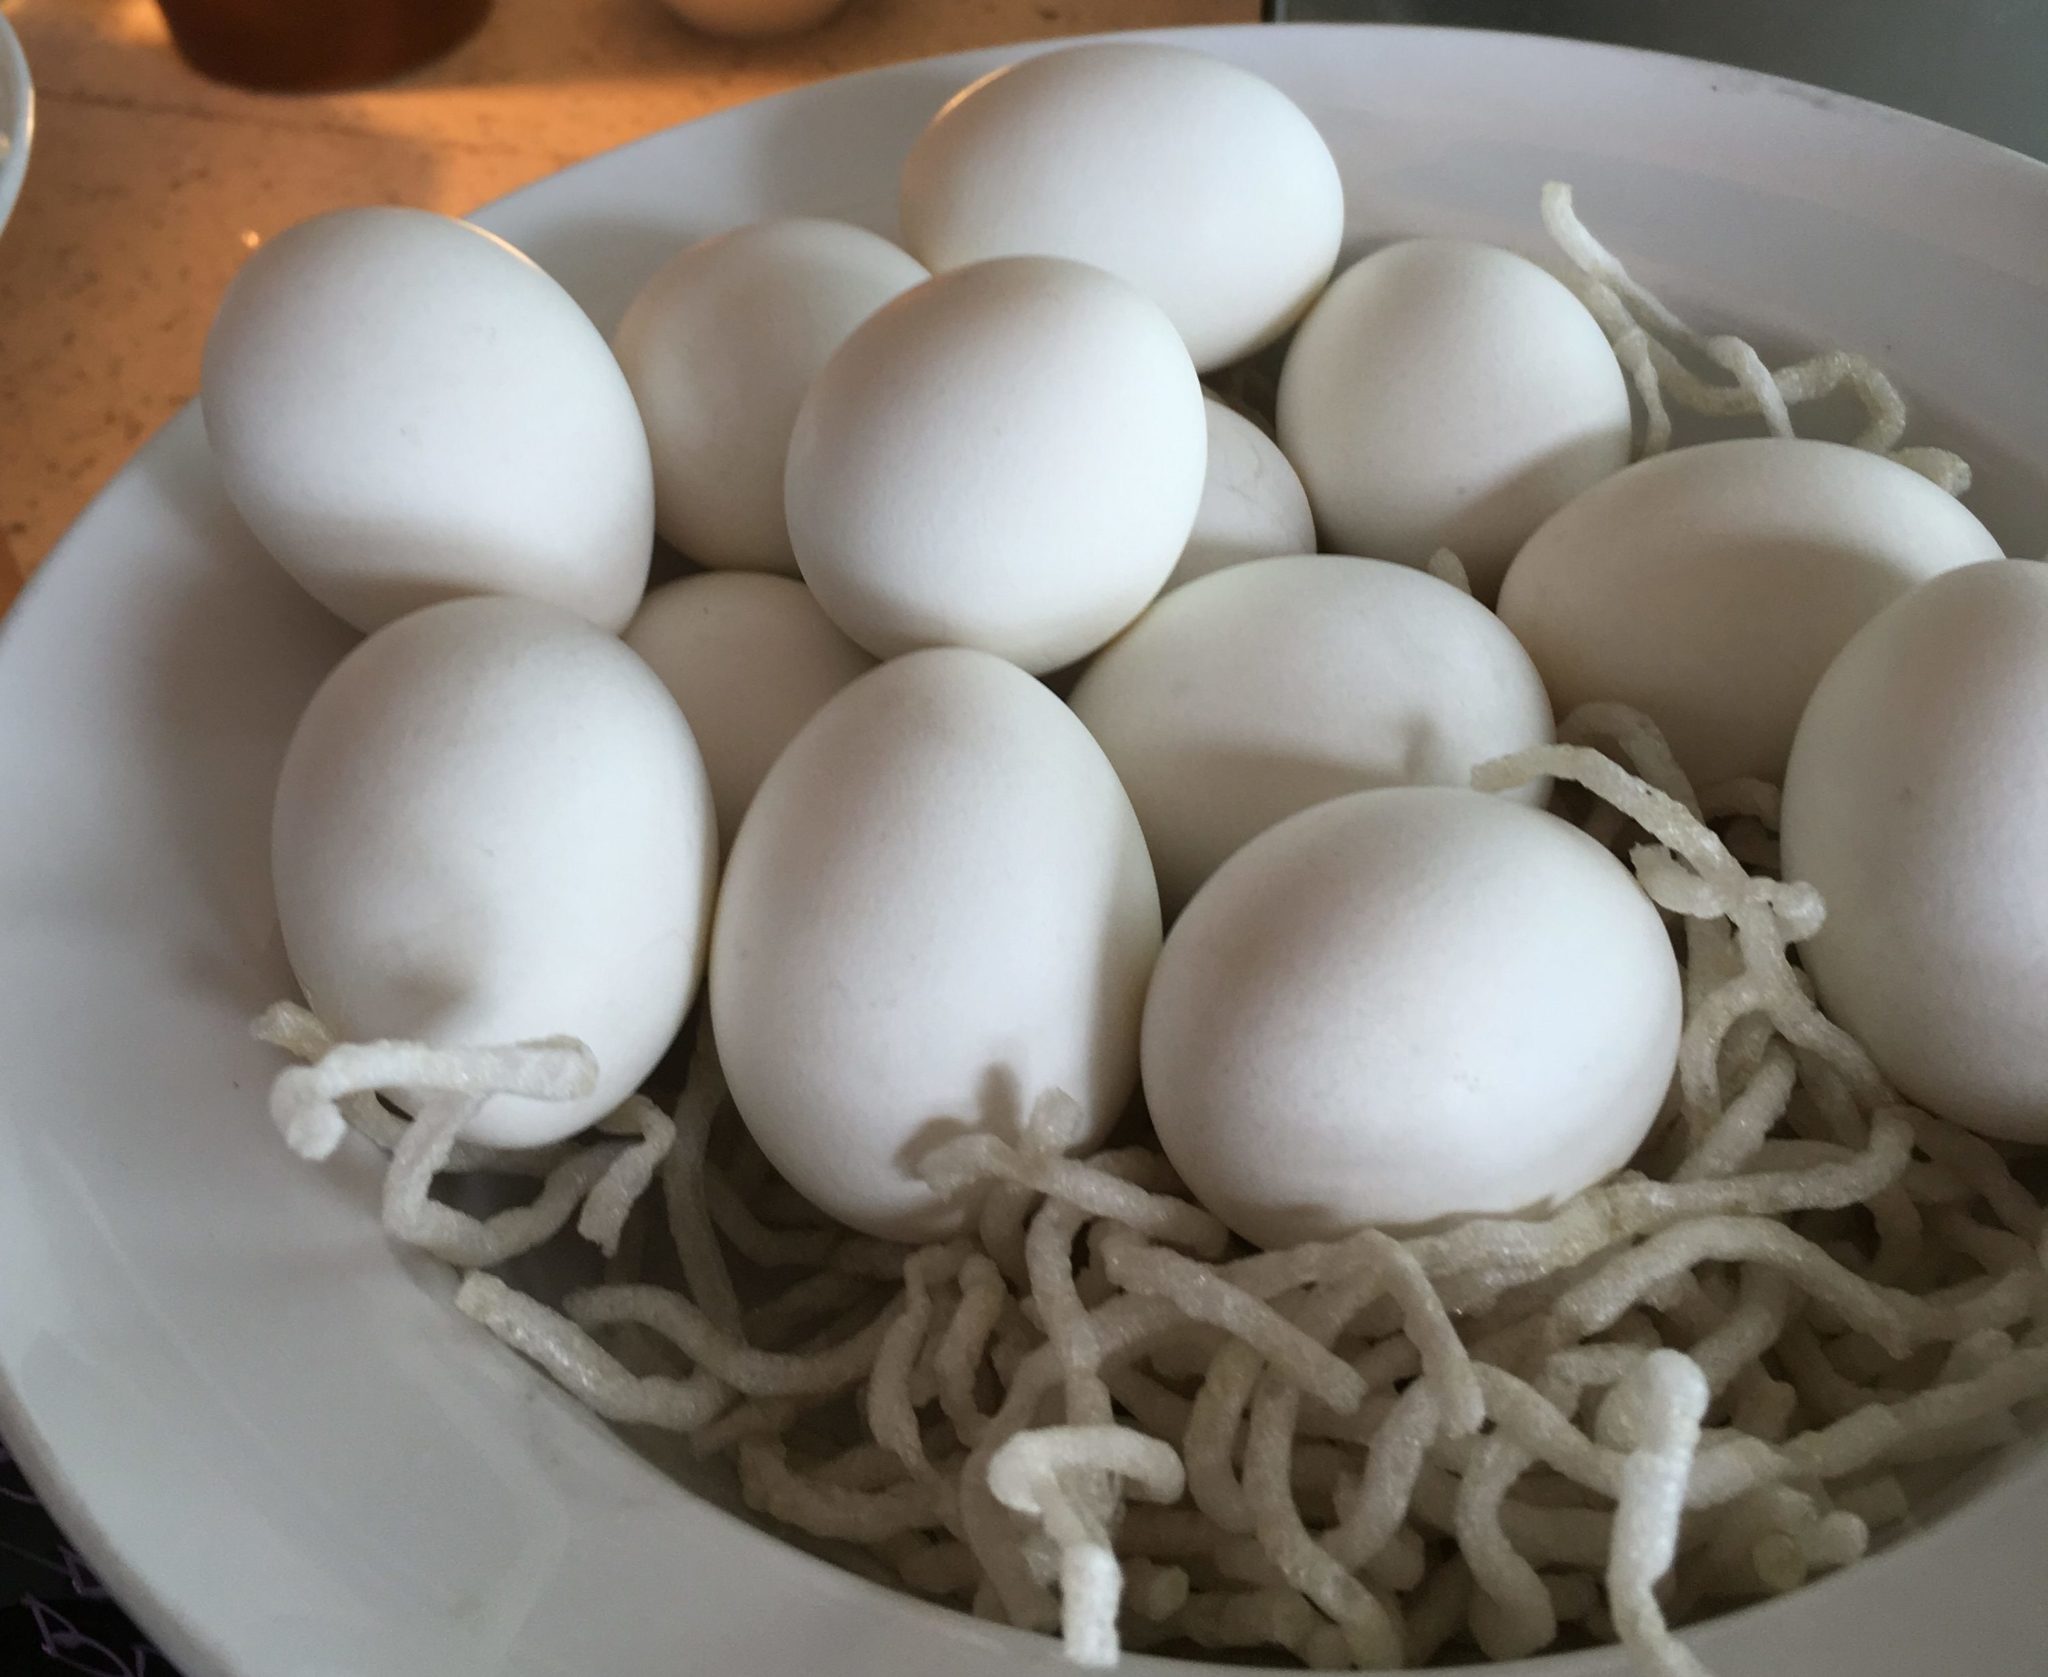 A bowl of several white eggs